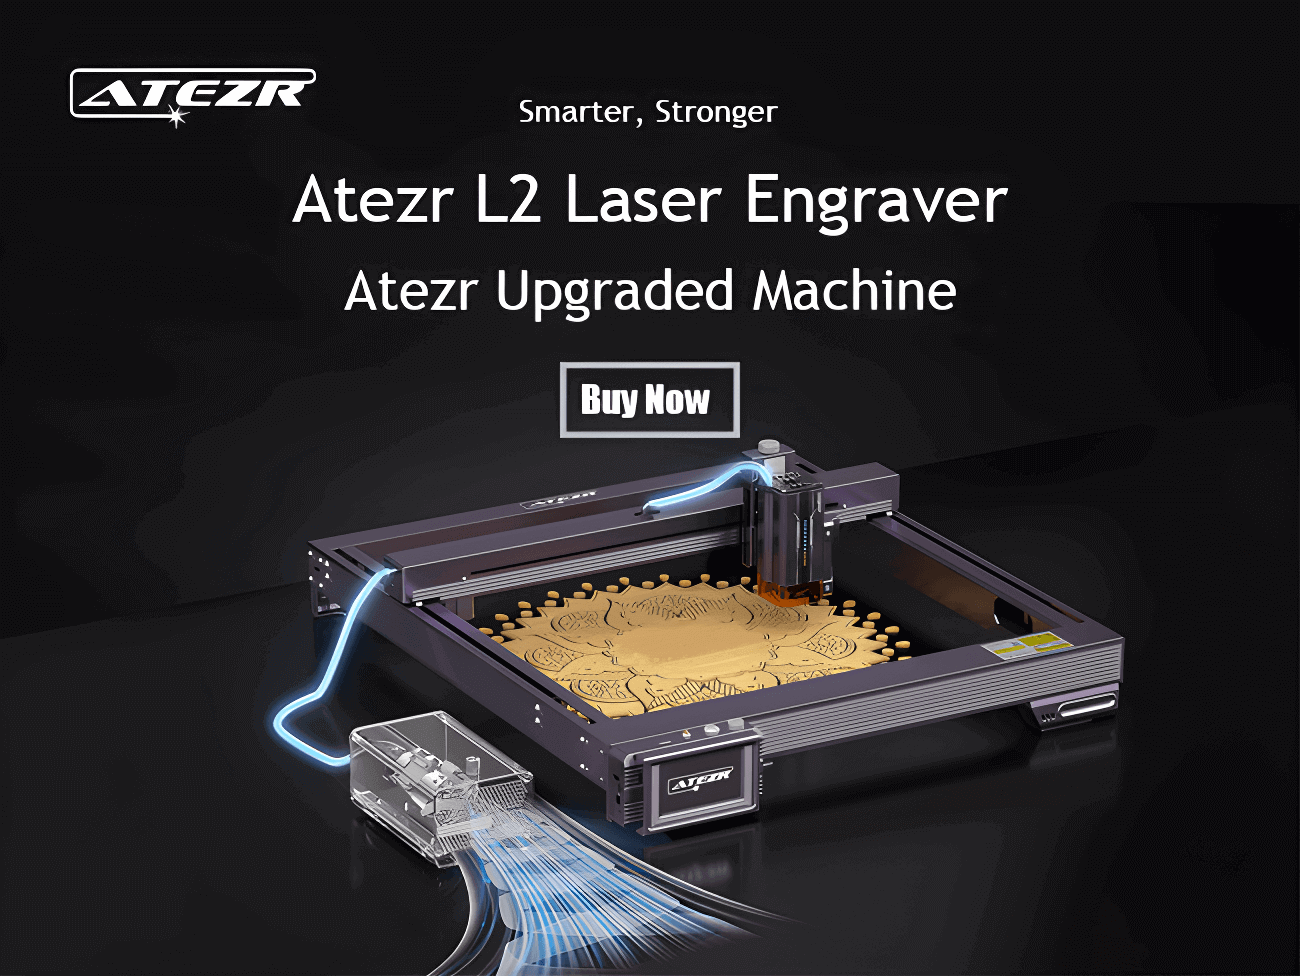 ATEZR Enclosure Pro, Flame Retardant and Smoke-Proof Laser Engraver  Accessories, Foldable Safety Enclosure for Atezr Laser Engraver and Other  Laser